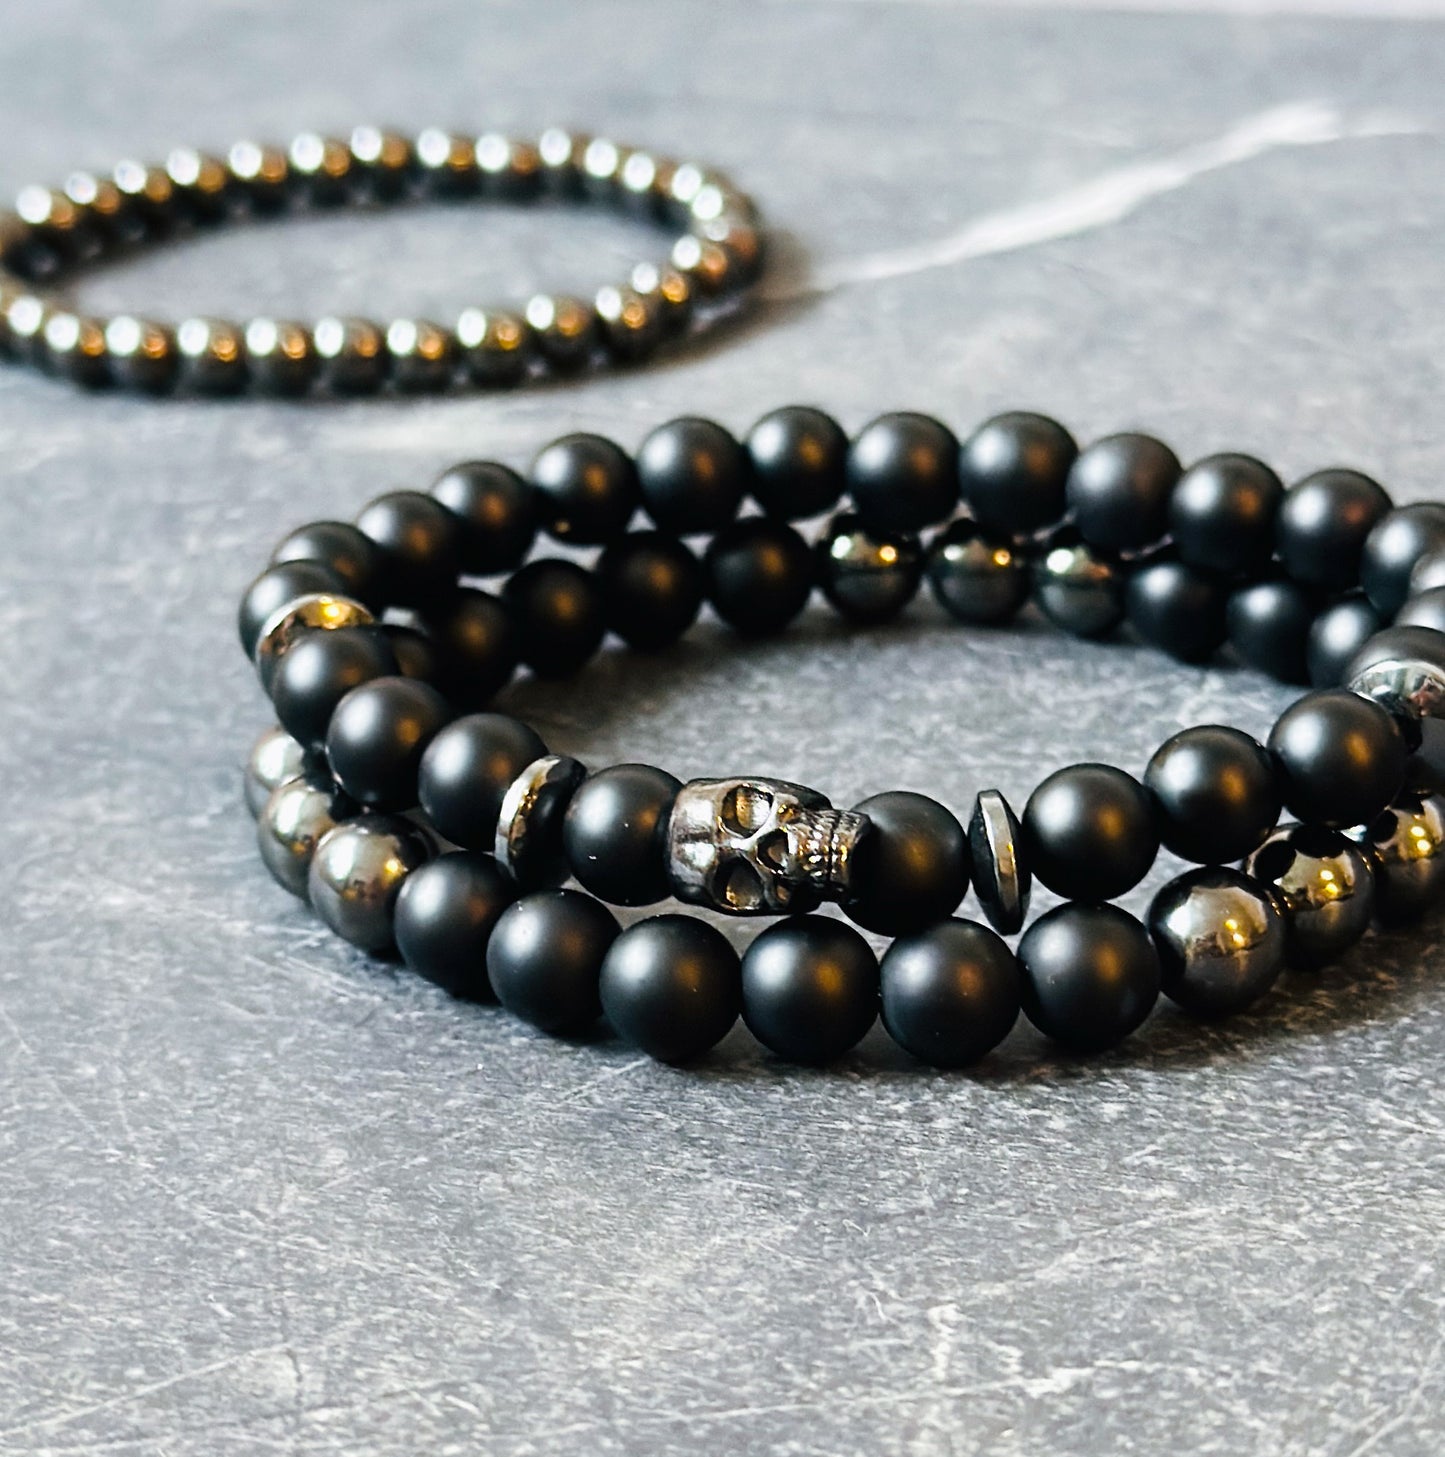 mens gemstone bracelets made with Matte Onyx, Hematite and a skull bead 